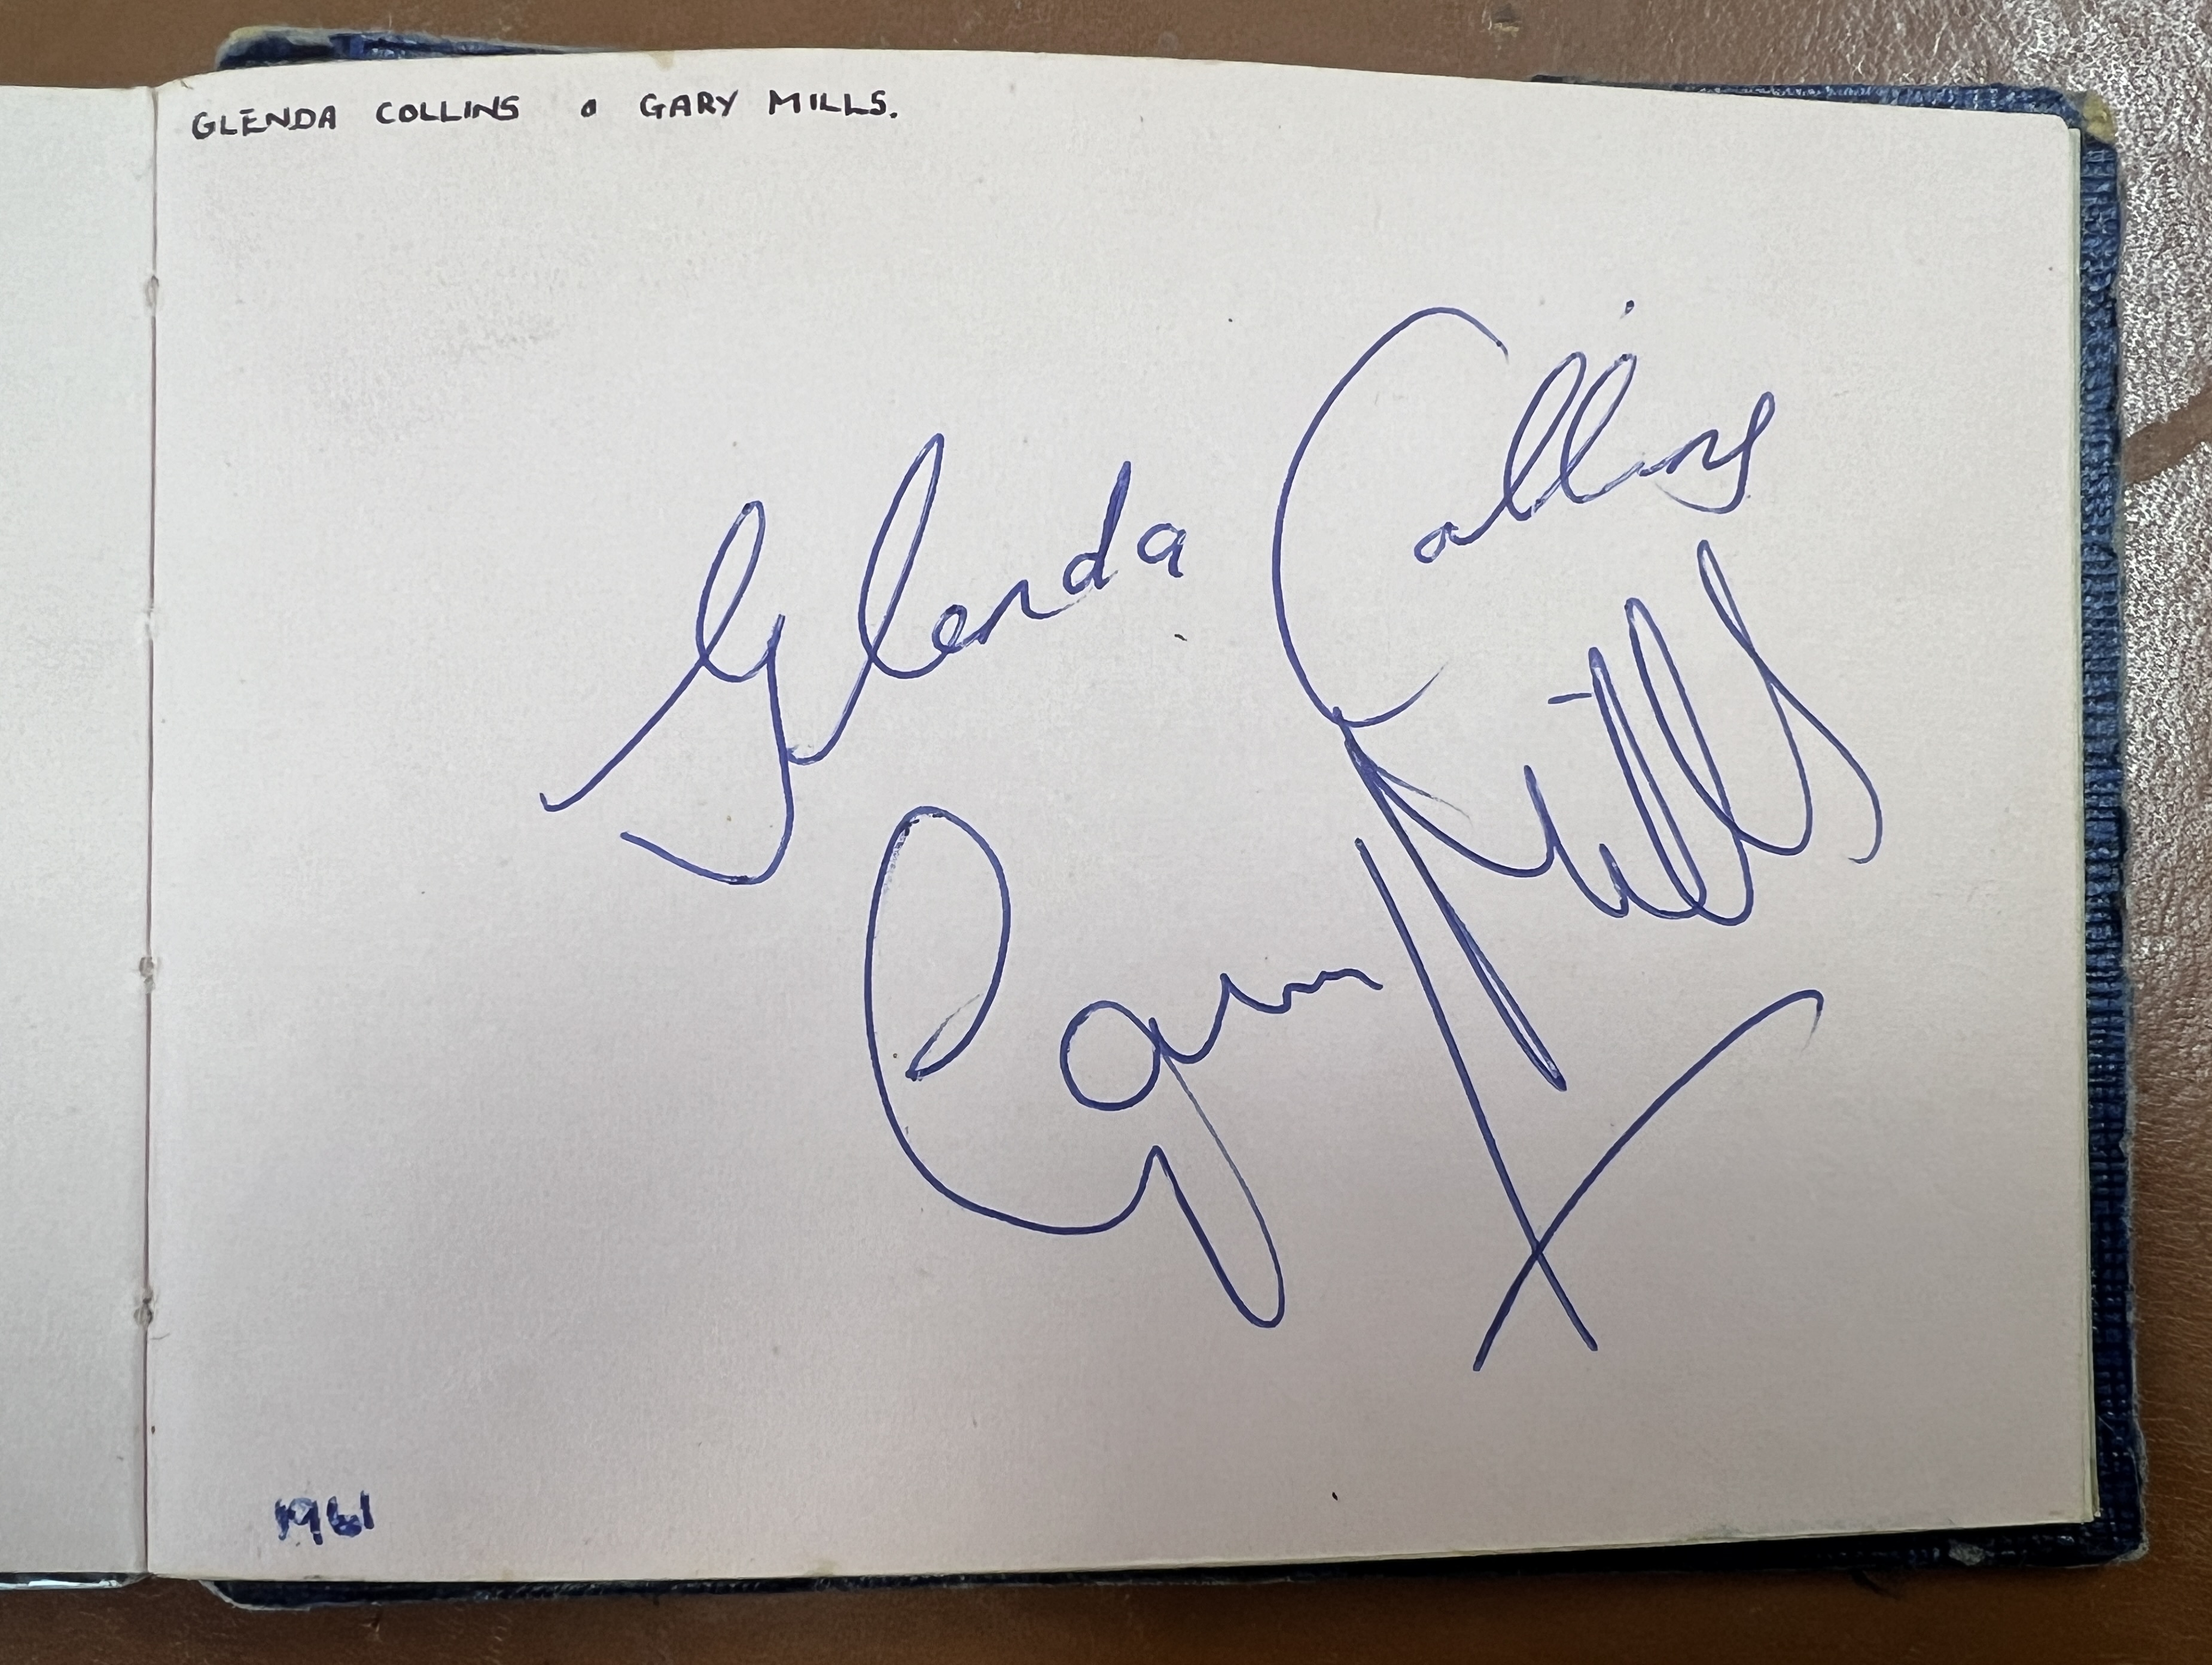 A 1960's autograph album containing autographs of various celebrities including Cliff Richard, - Image 7 of 37